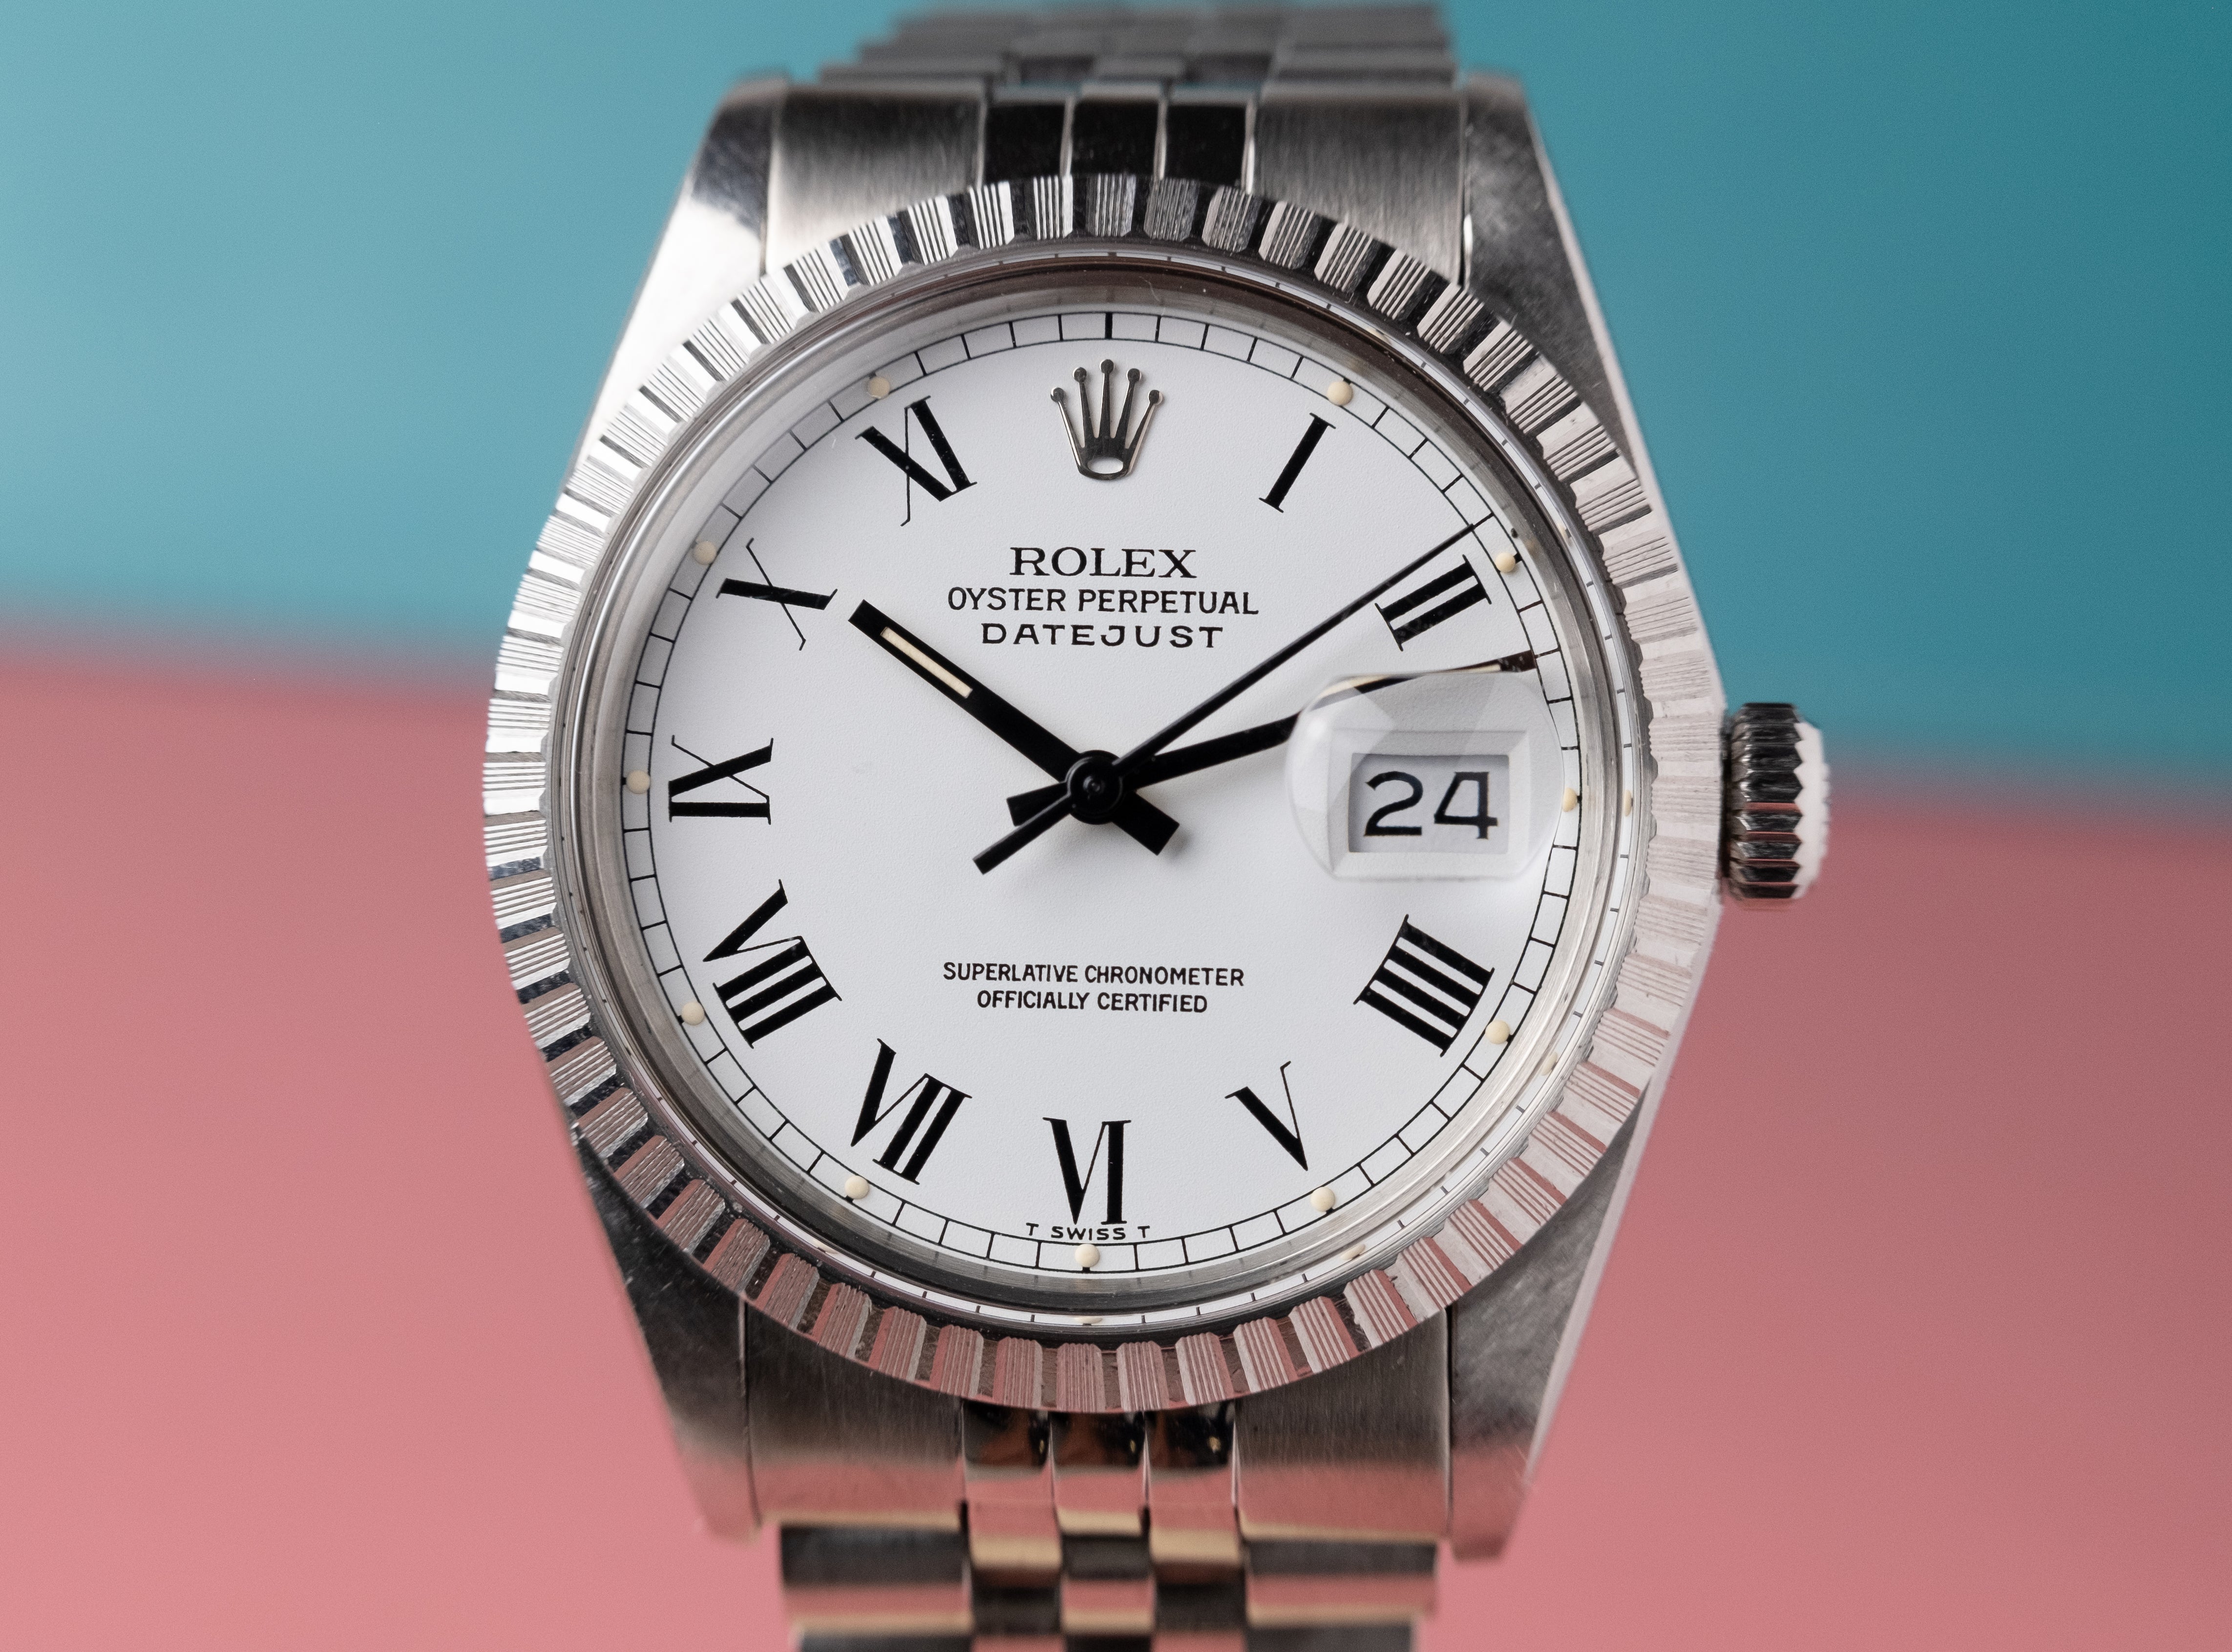 ROLEX Oyster Perpetual Datejust Ref. 16030 Buckley Dial (1985)